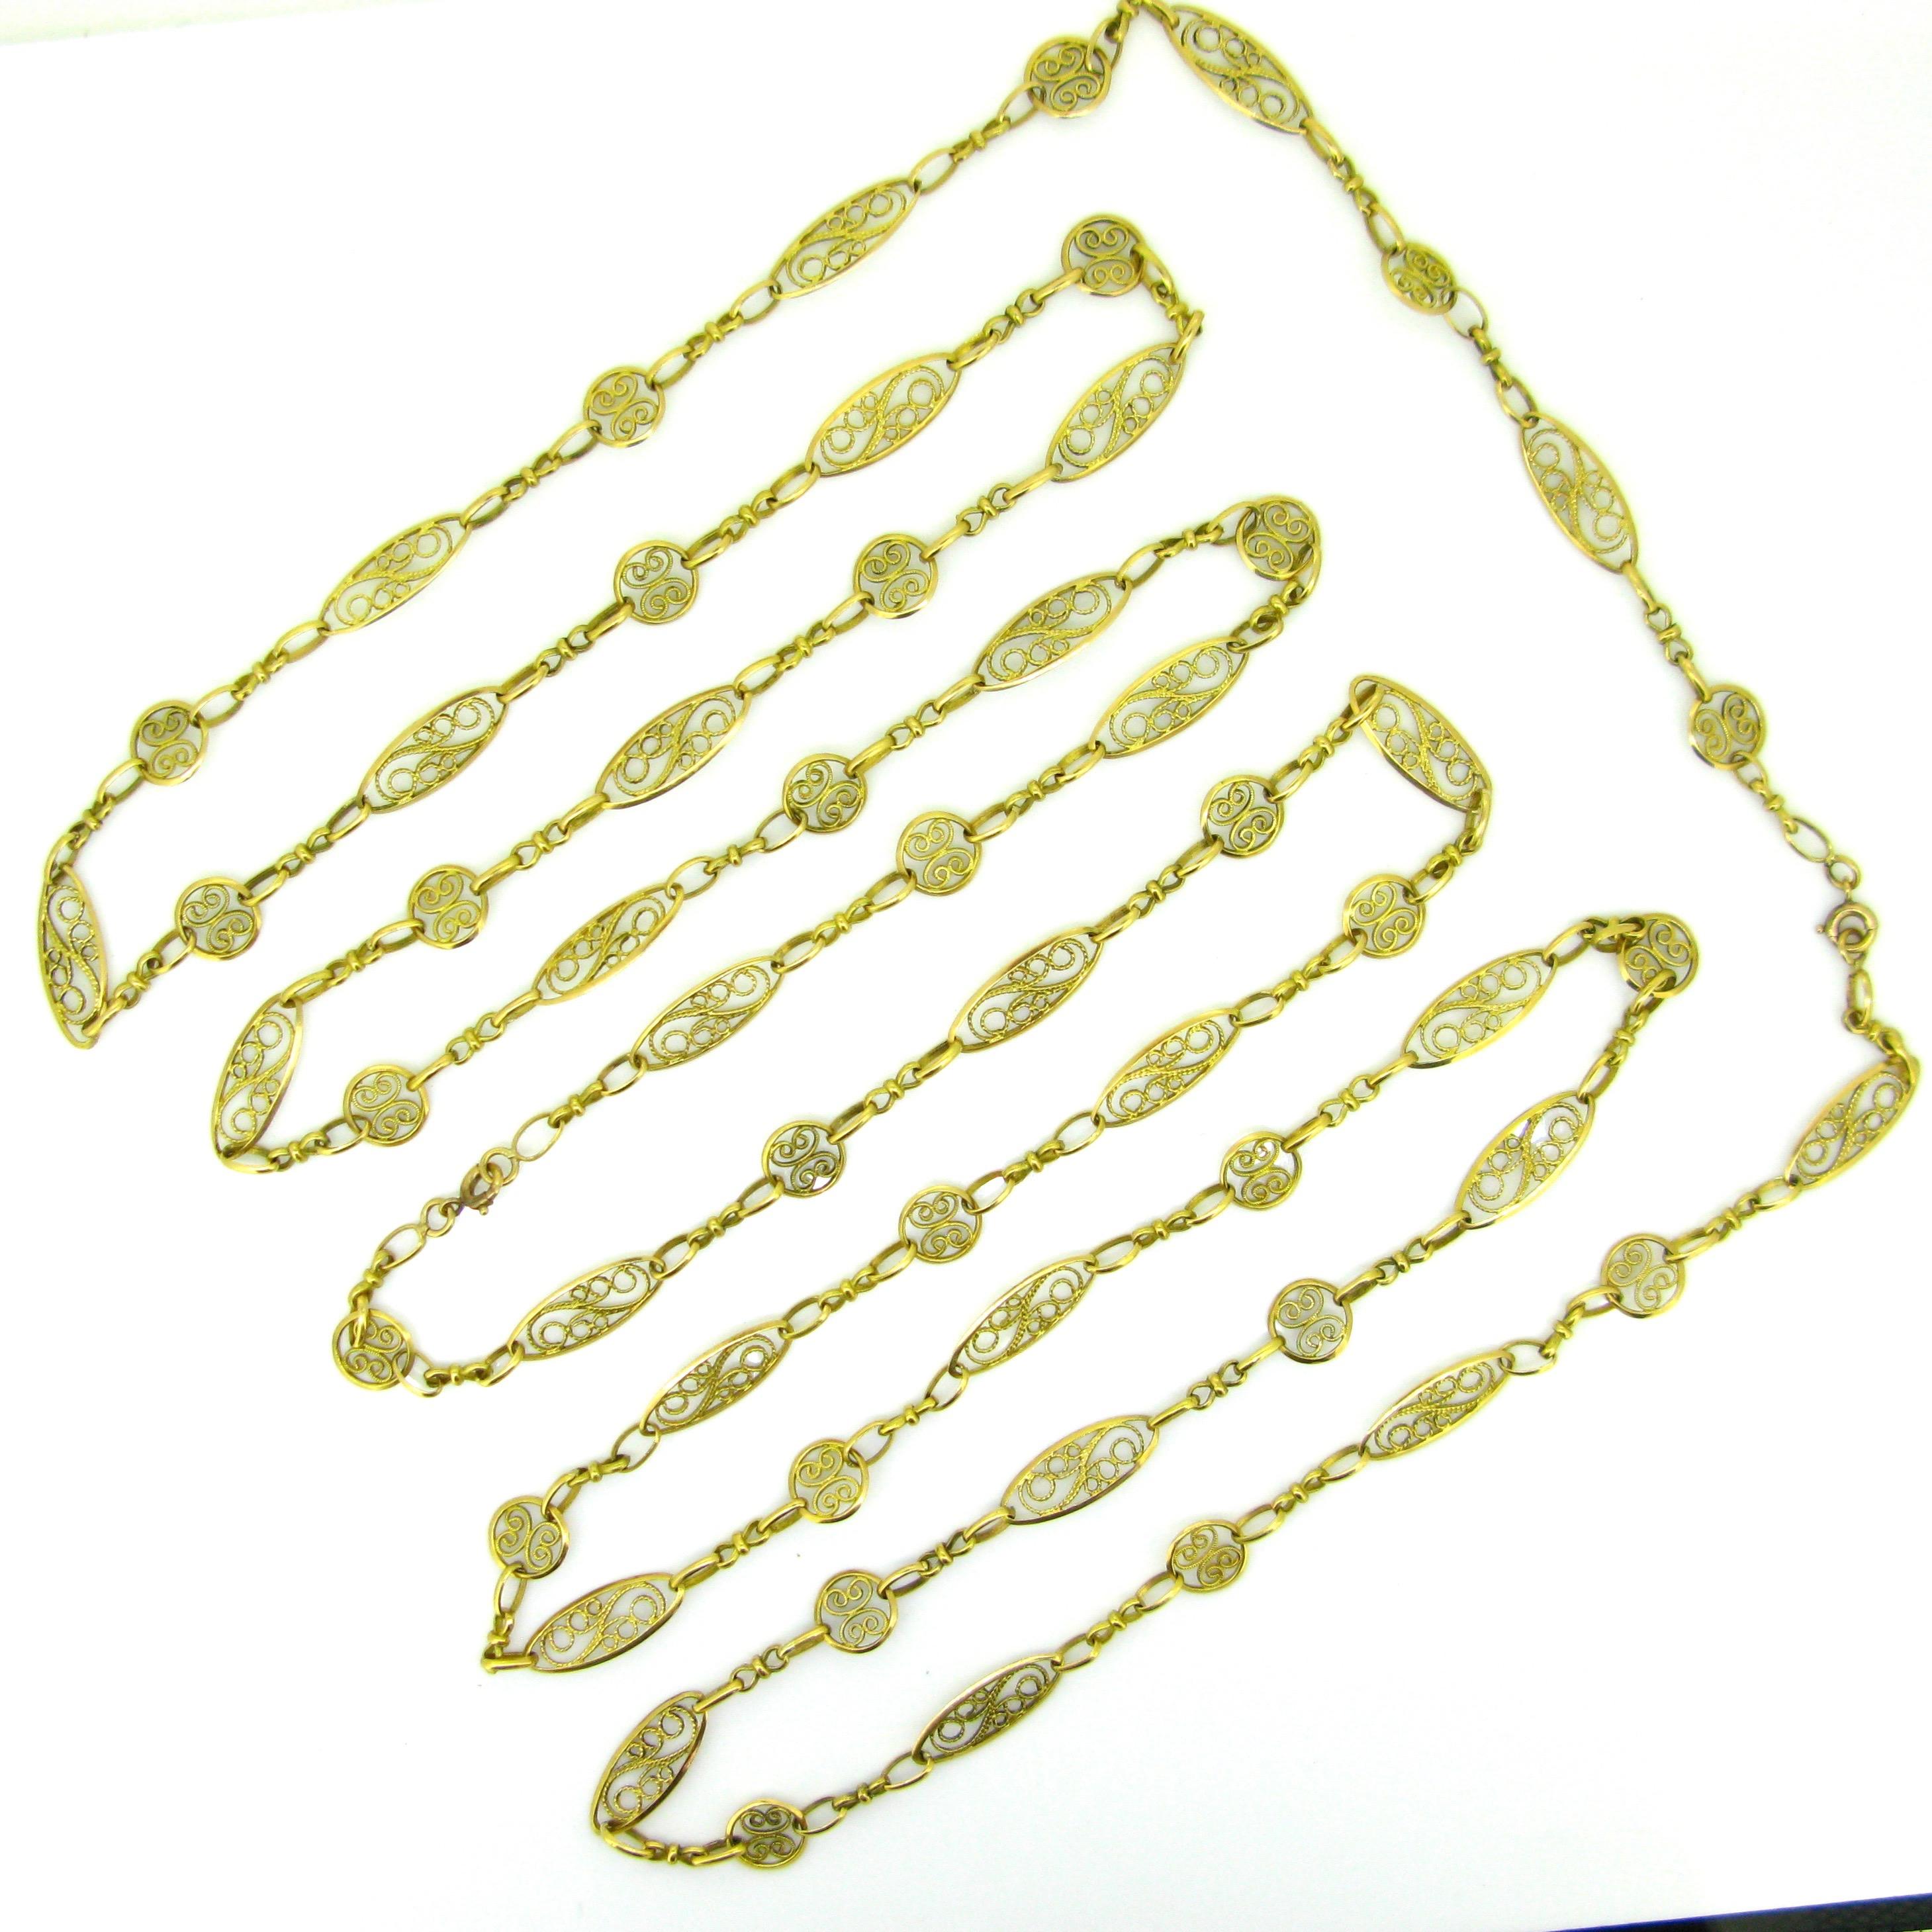 Circa: Victorian, circa 1880

Weight: 46gr

Metal: 18kt yellow gold

Condition: Very good

Comments: This long chain is from the late Victorian period, circa 1880. It is made in 18k yellow gold (tested). It comprises 2 clasps. The chain is in very